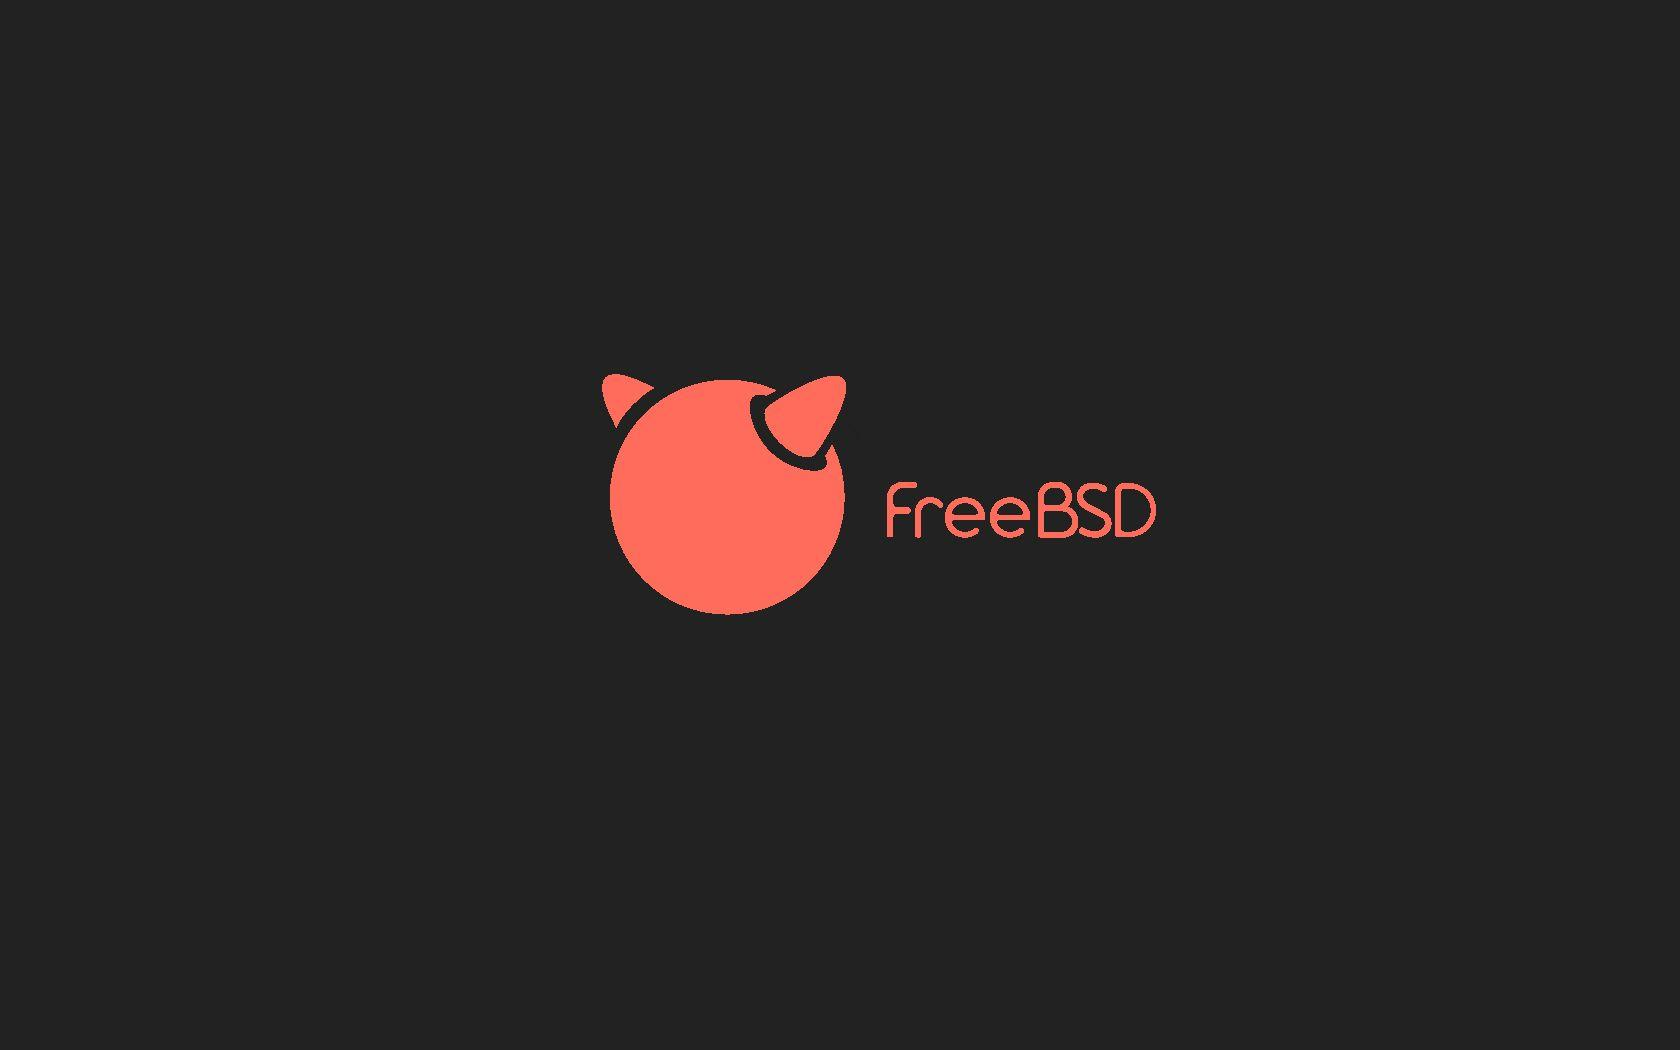 This tutorials covers how to install FreeBSD on a remote server, manually, and covers different types of setup including ZFS, UFS, encrypted swap or data partition